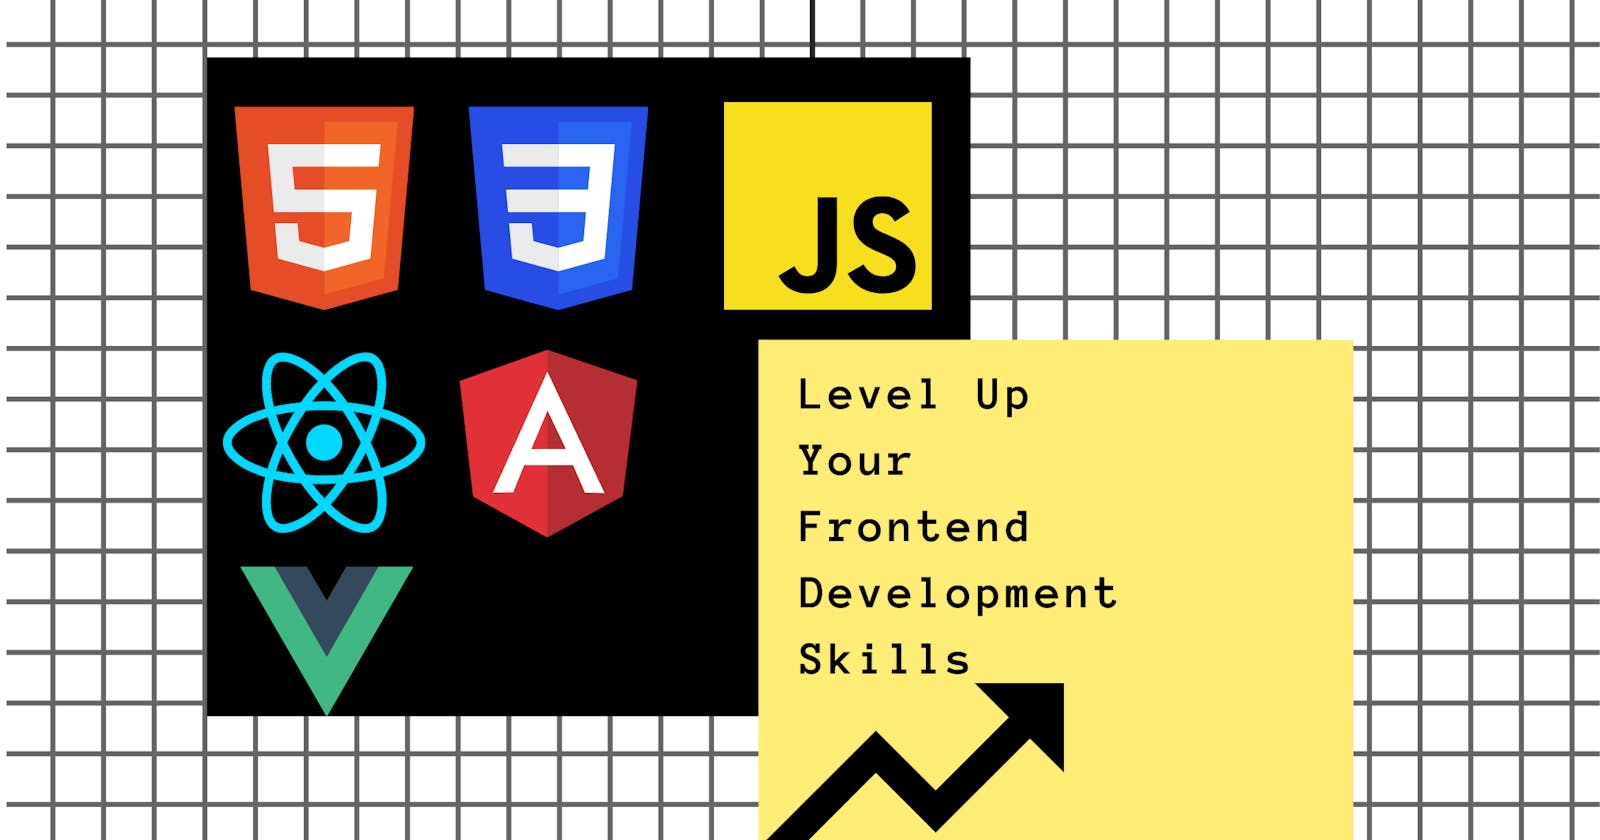 10 Platforms to Help Level Up Your Frontend Development Skills